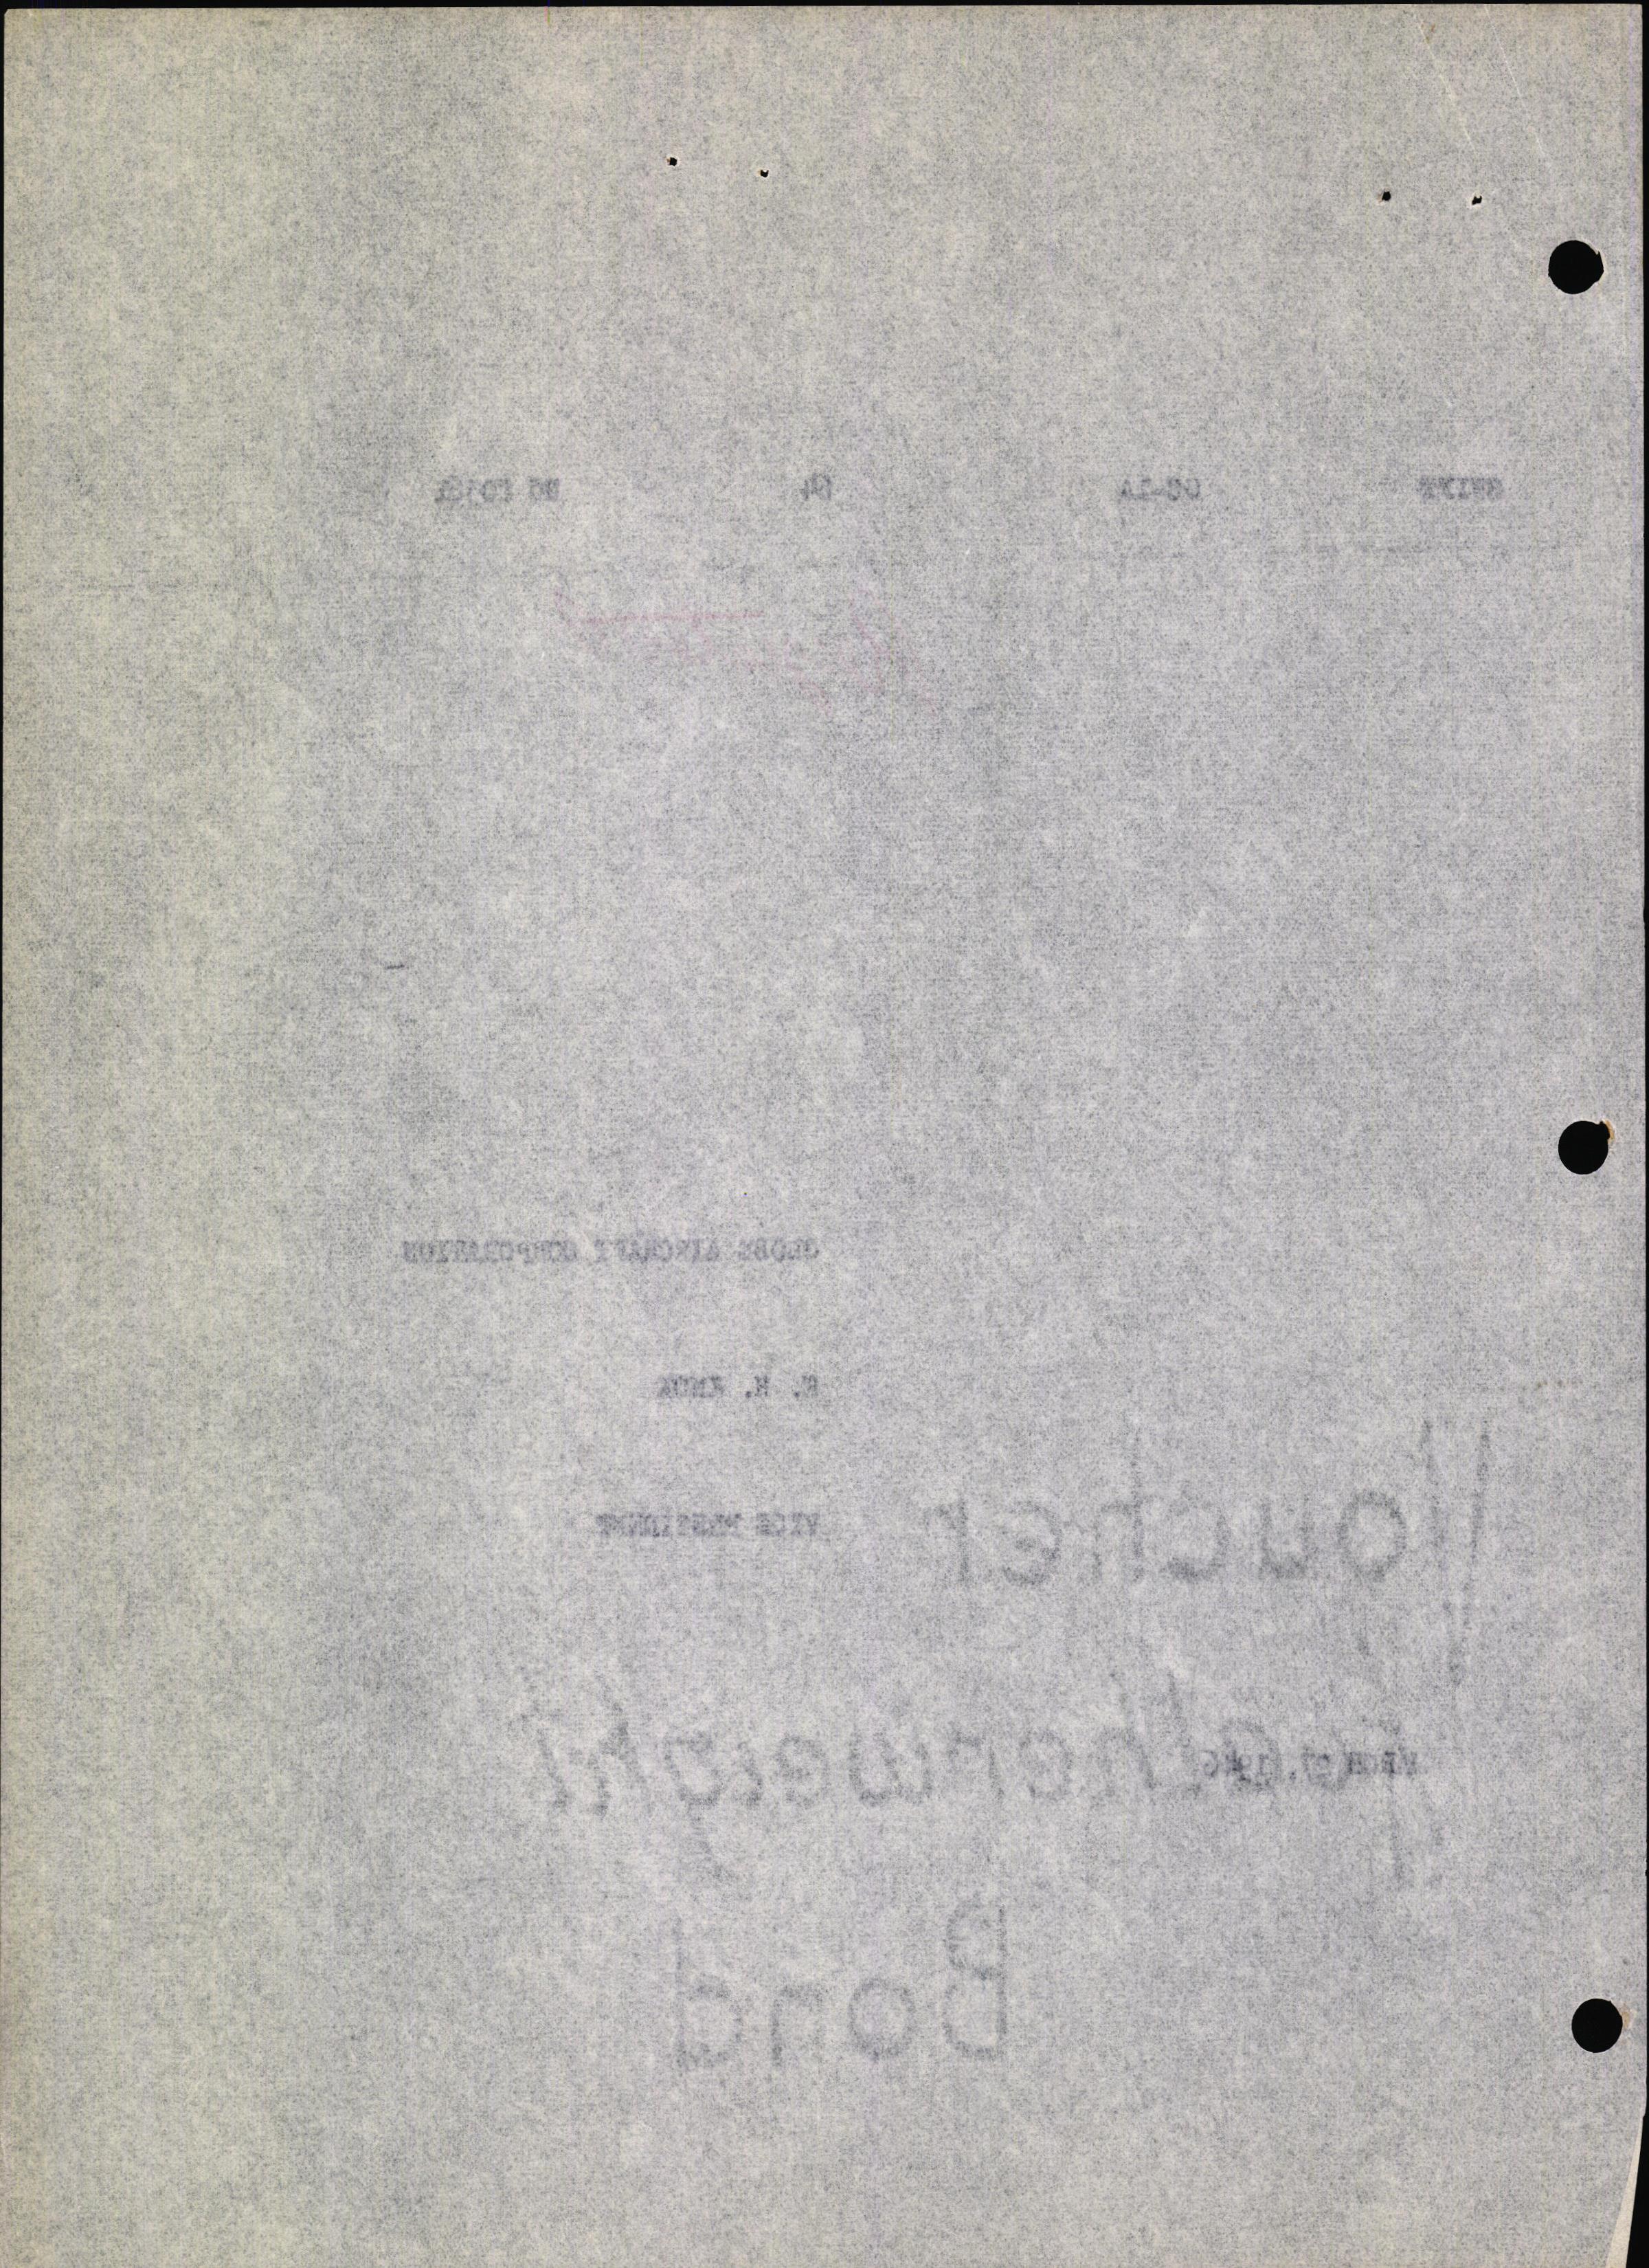 Sample page 6 from AirCorps Library document: Technical Information for Serial Number 64